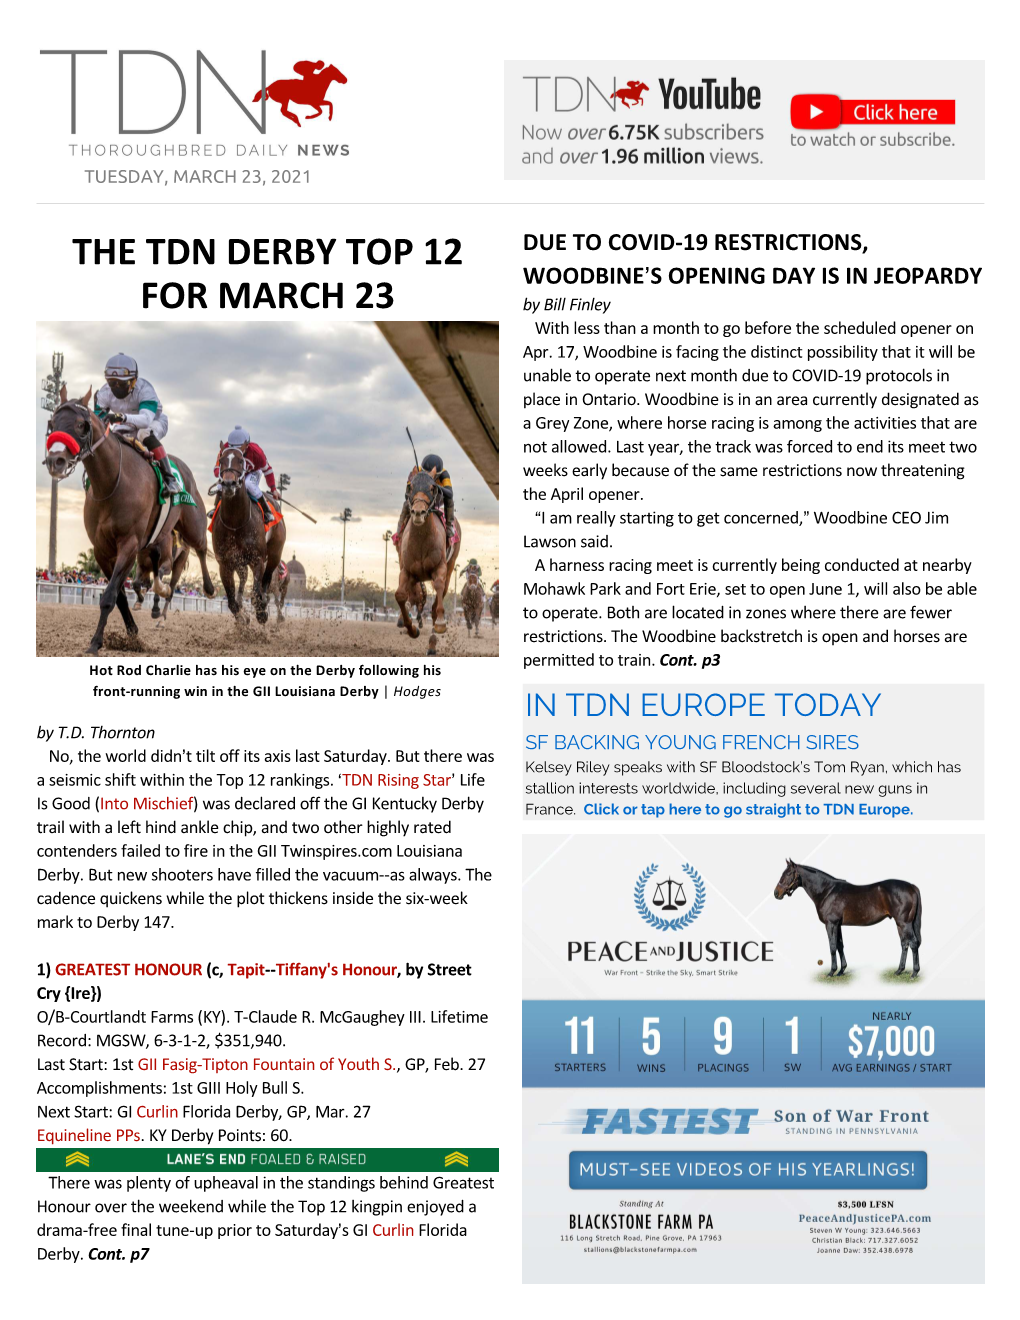 Tdn America Today the Tdn Derby Top 12 for Mar